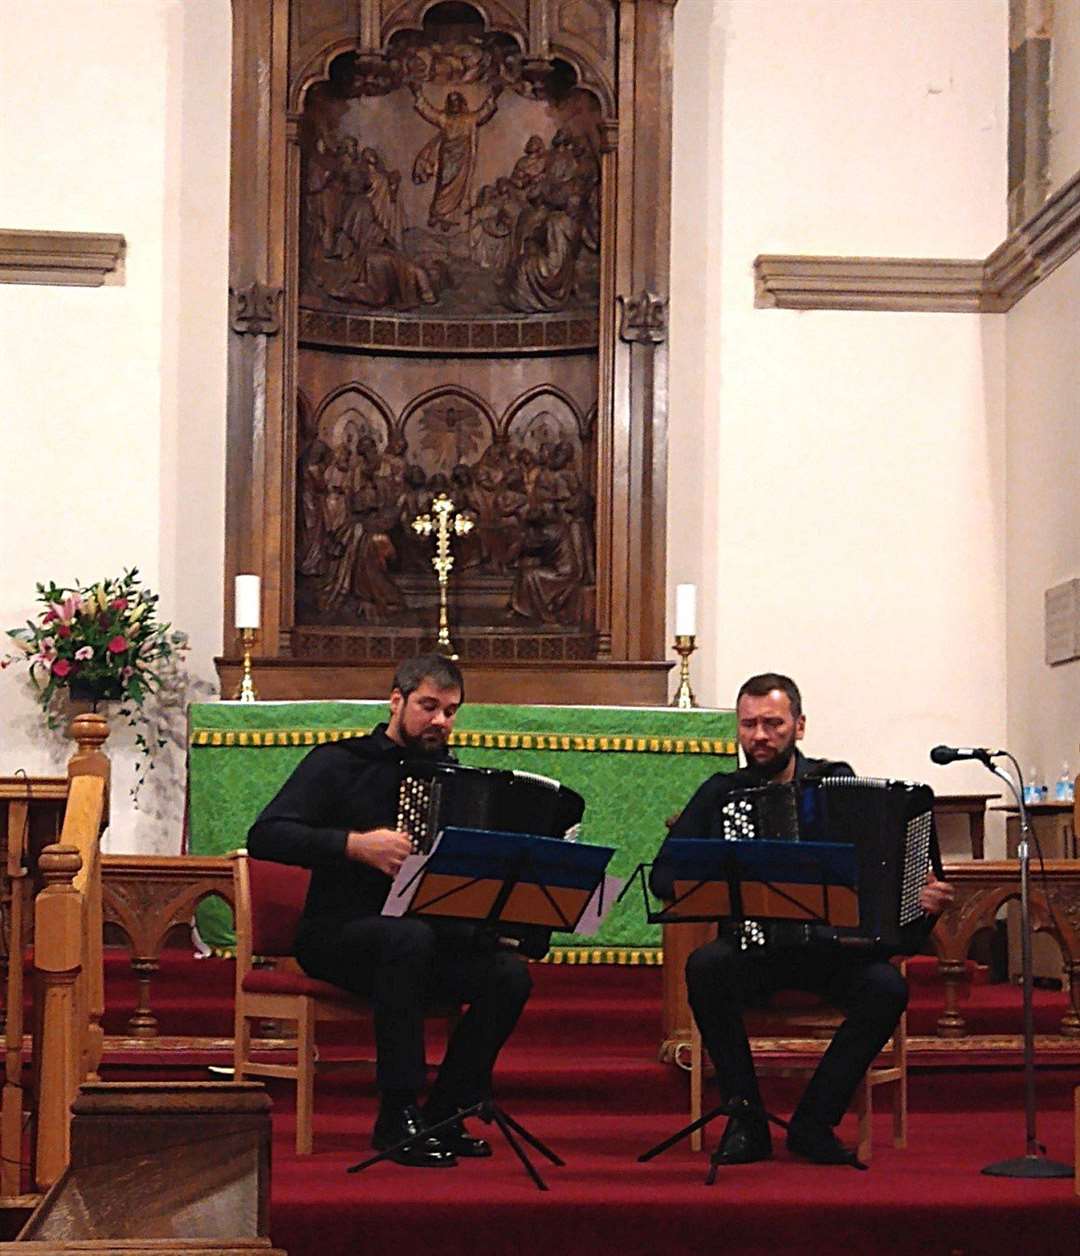 Igor Sayenko and Oleksii Kolomoiets – the Kyiv Classic Accordion Duo – during their performance at St Peter and the Holy Rood Episcopal Church in Thurso.